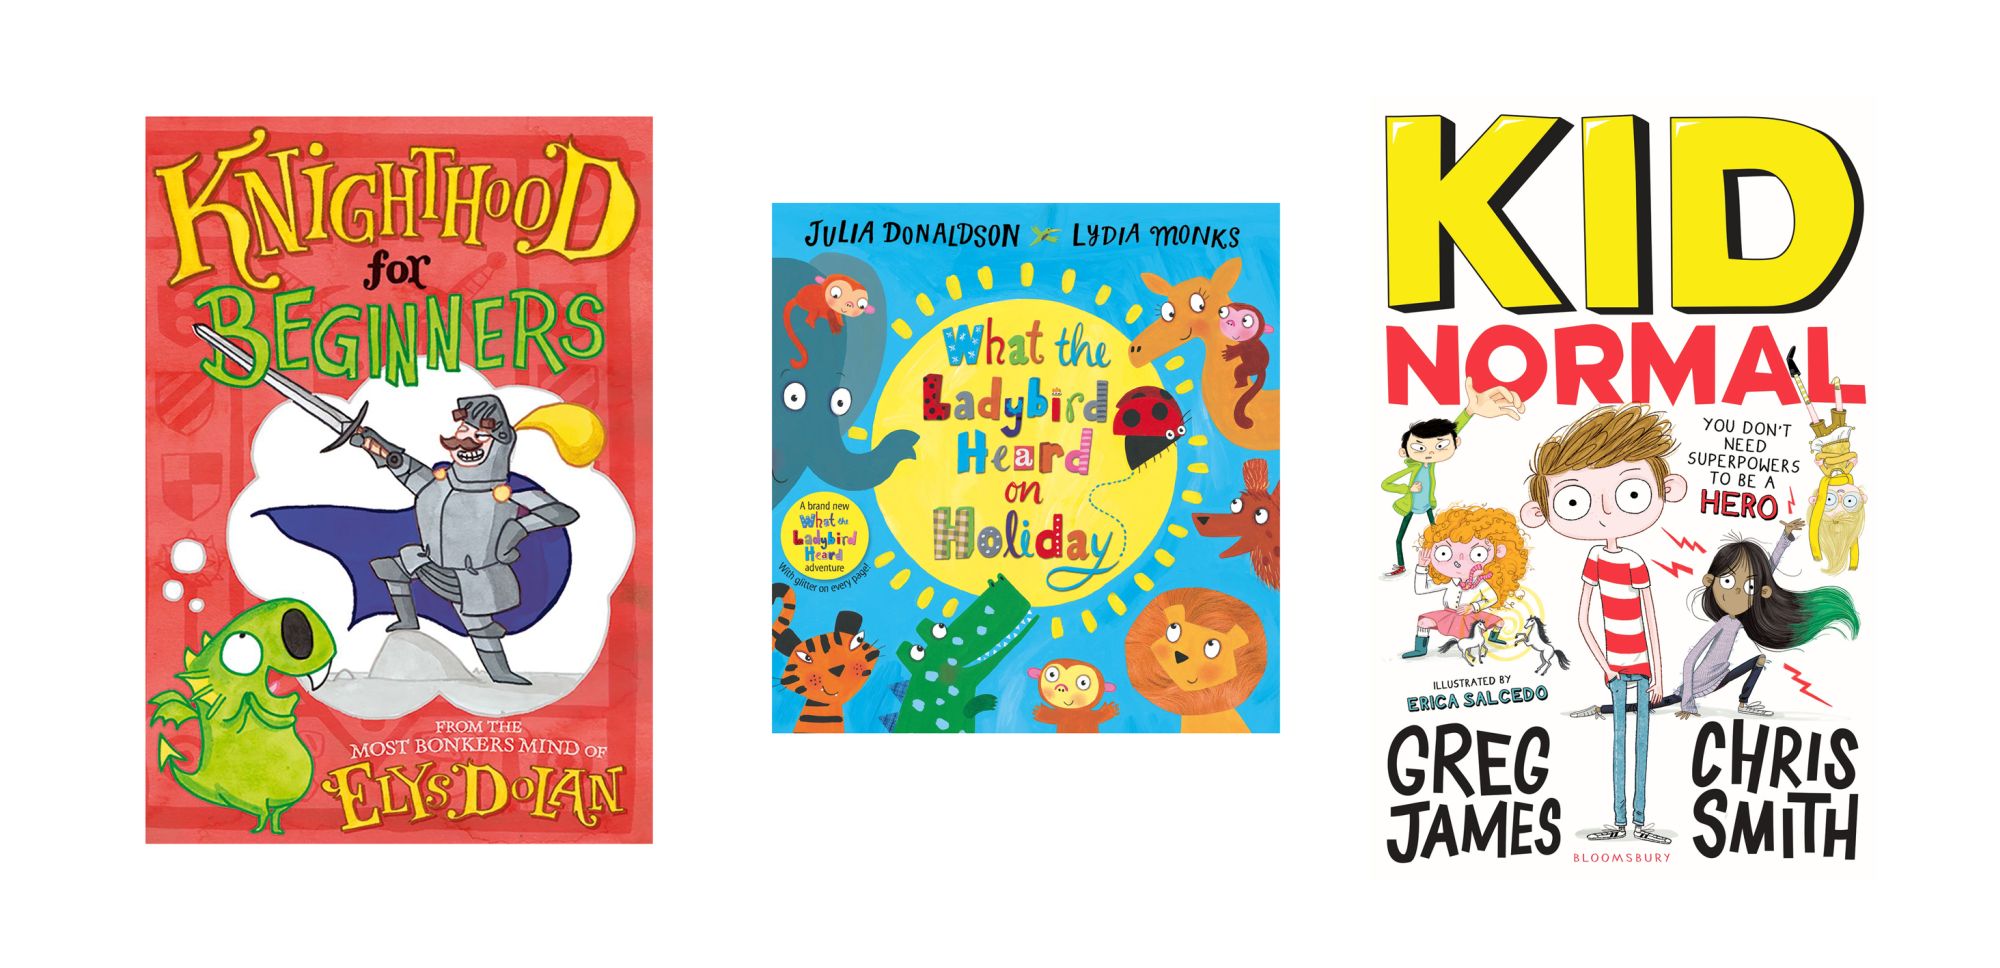 Three children's books by Elys Dolan, Julia Donaldson and Lydia Monks, and Greg James and Chris Smith (Oxford University Press/Macmillan Children's Books/Bloomsbury Childrens/PA)